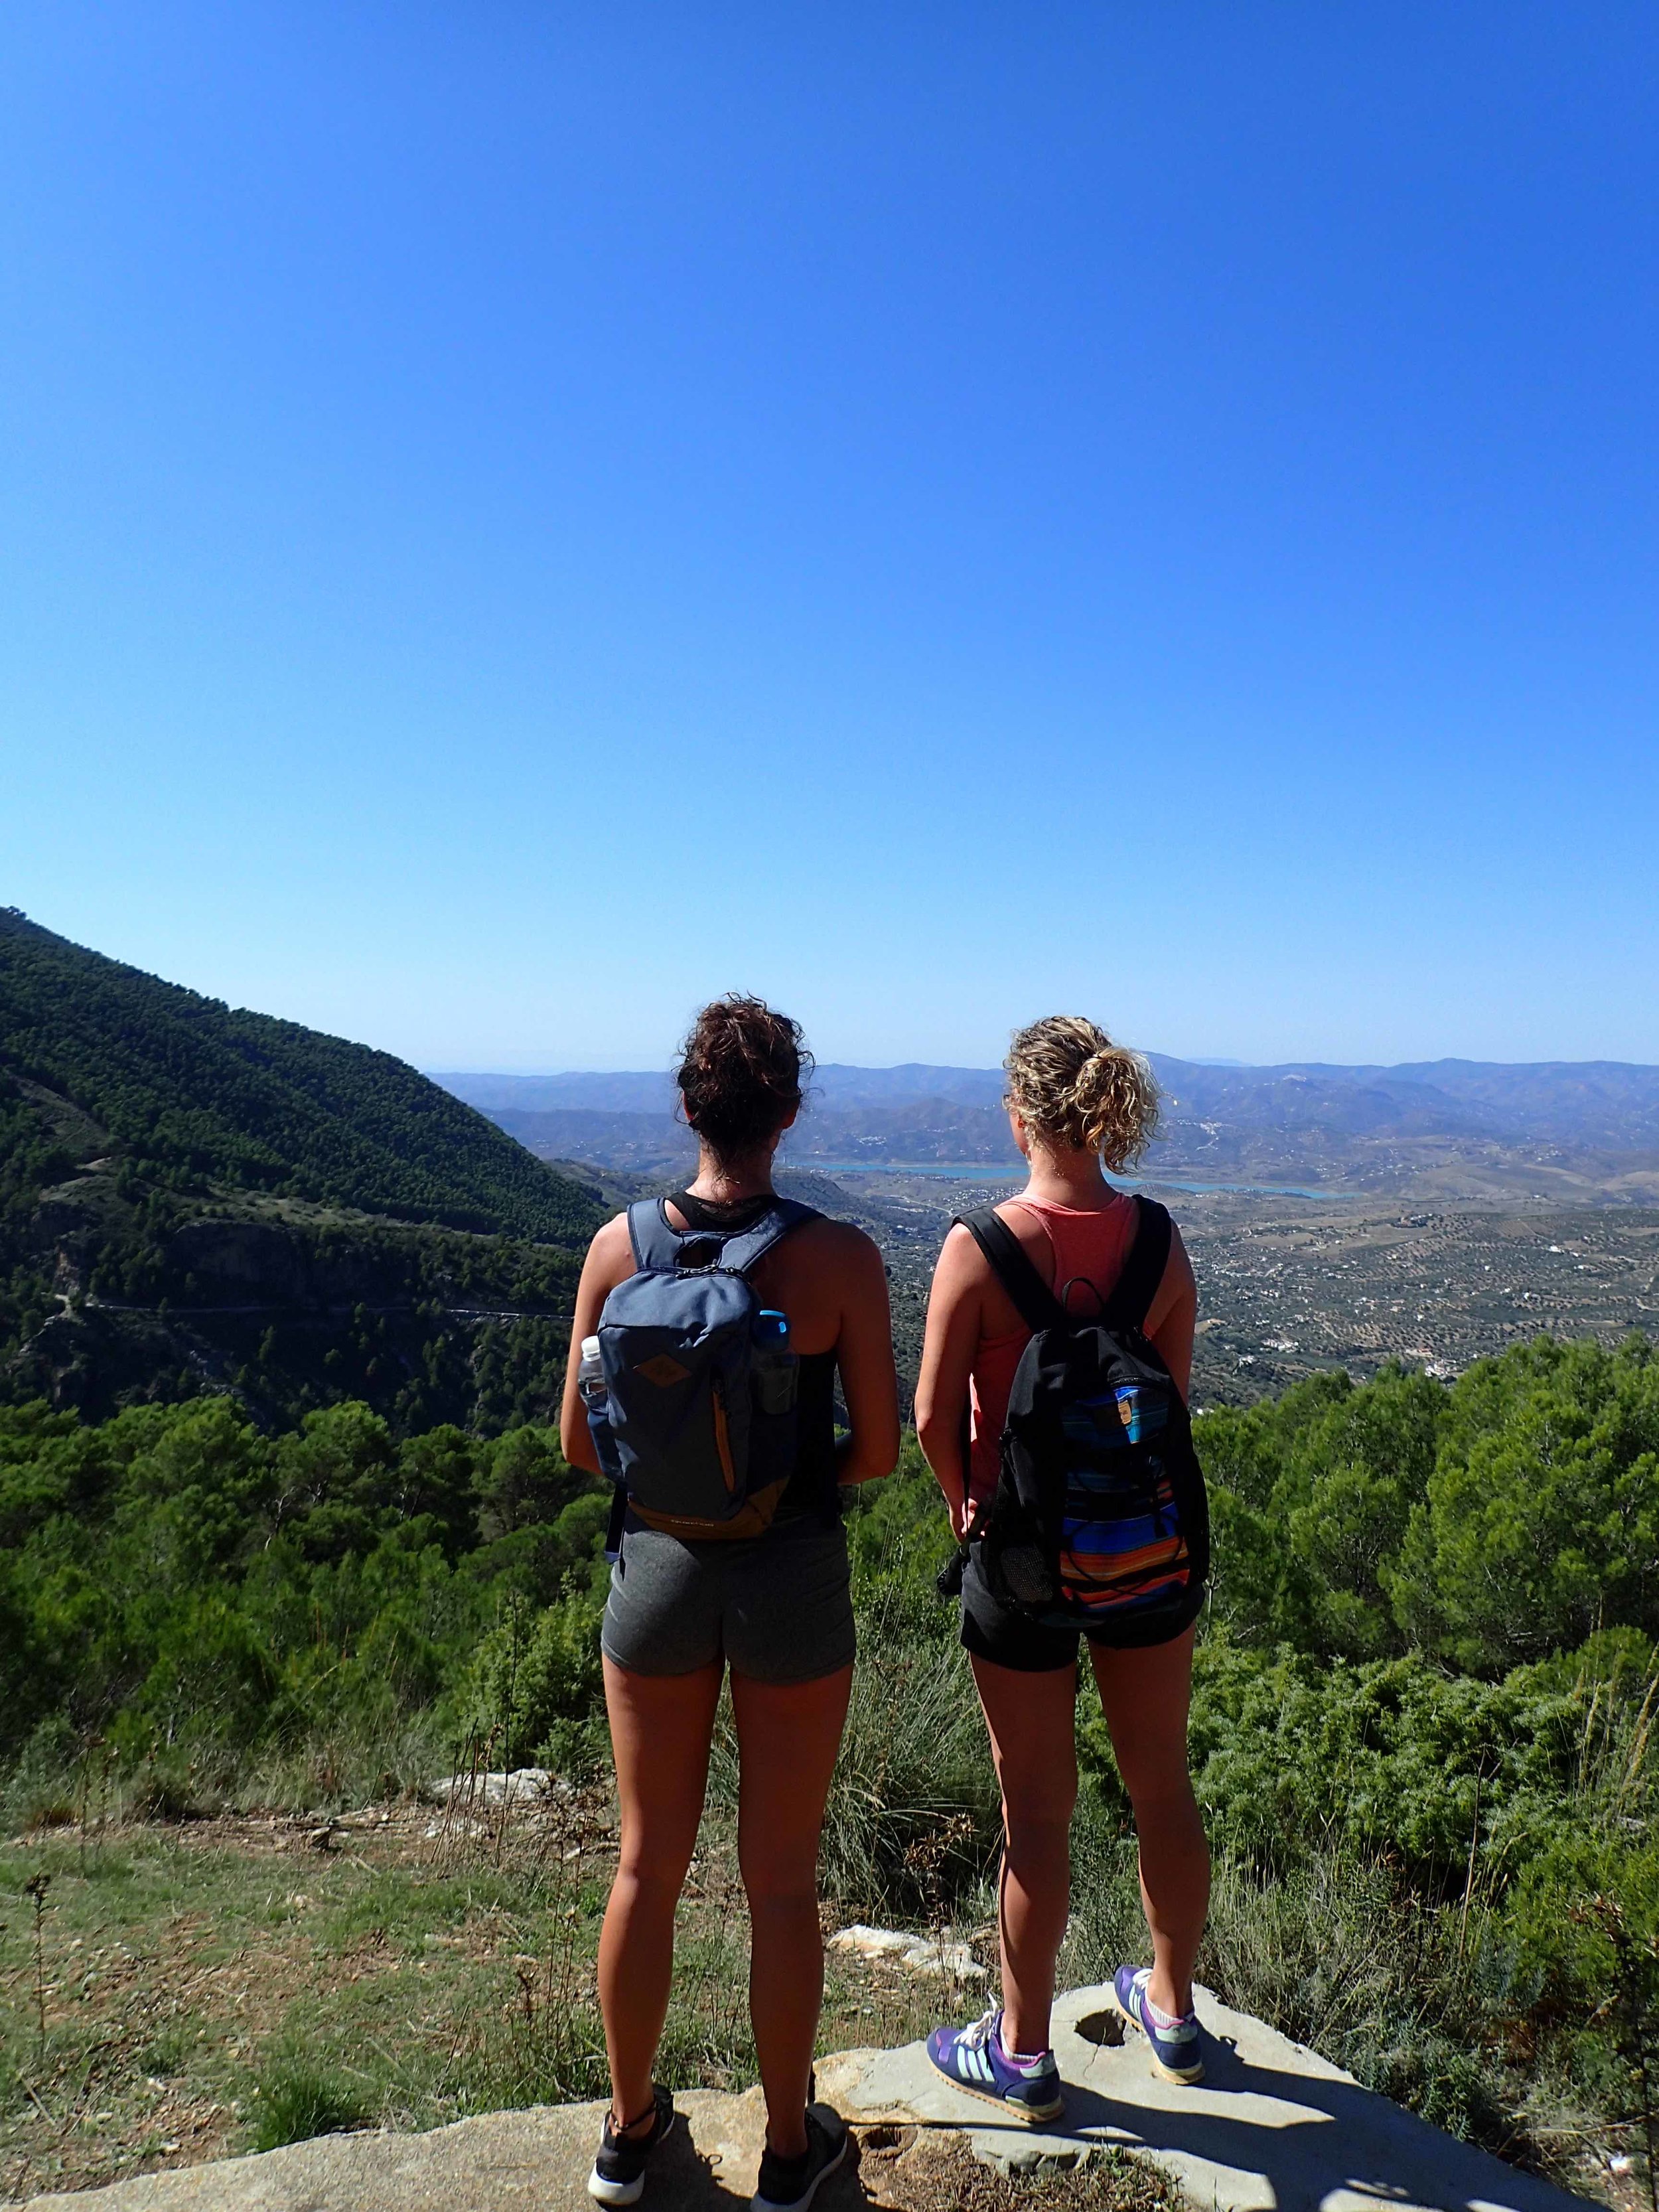 Sharing the amazing view at Yoga retreat in the Spanish mountains with Jane Bakx Yoga